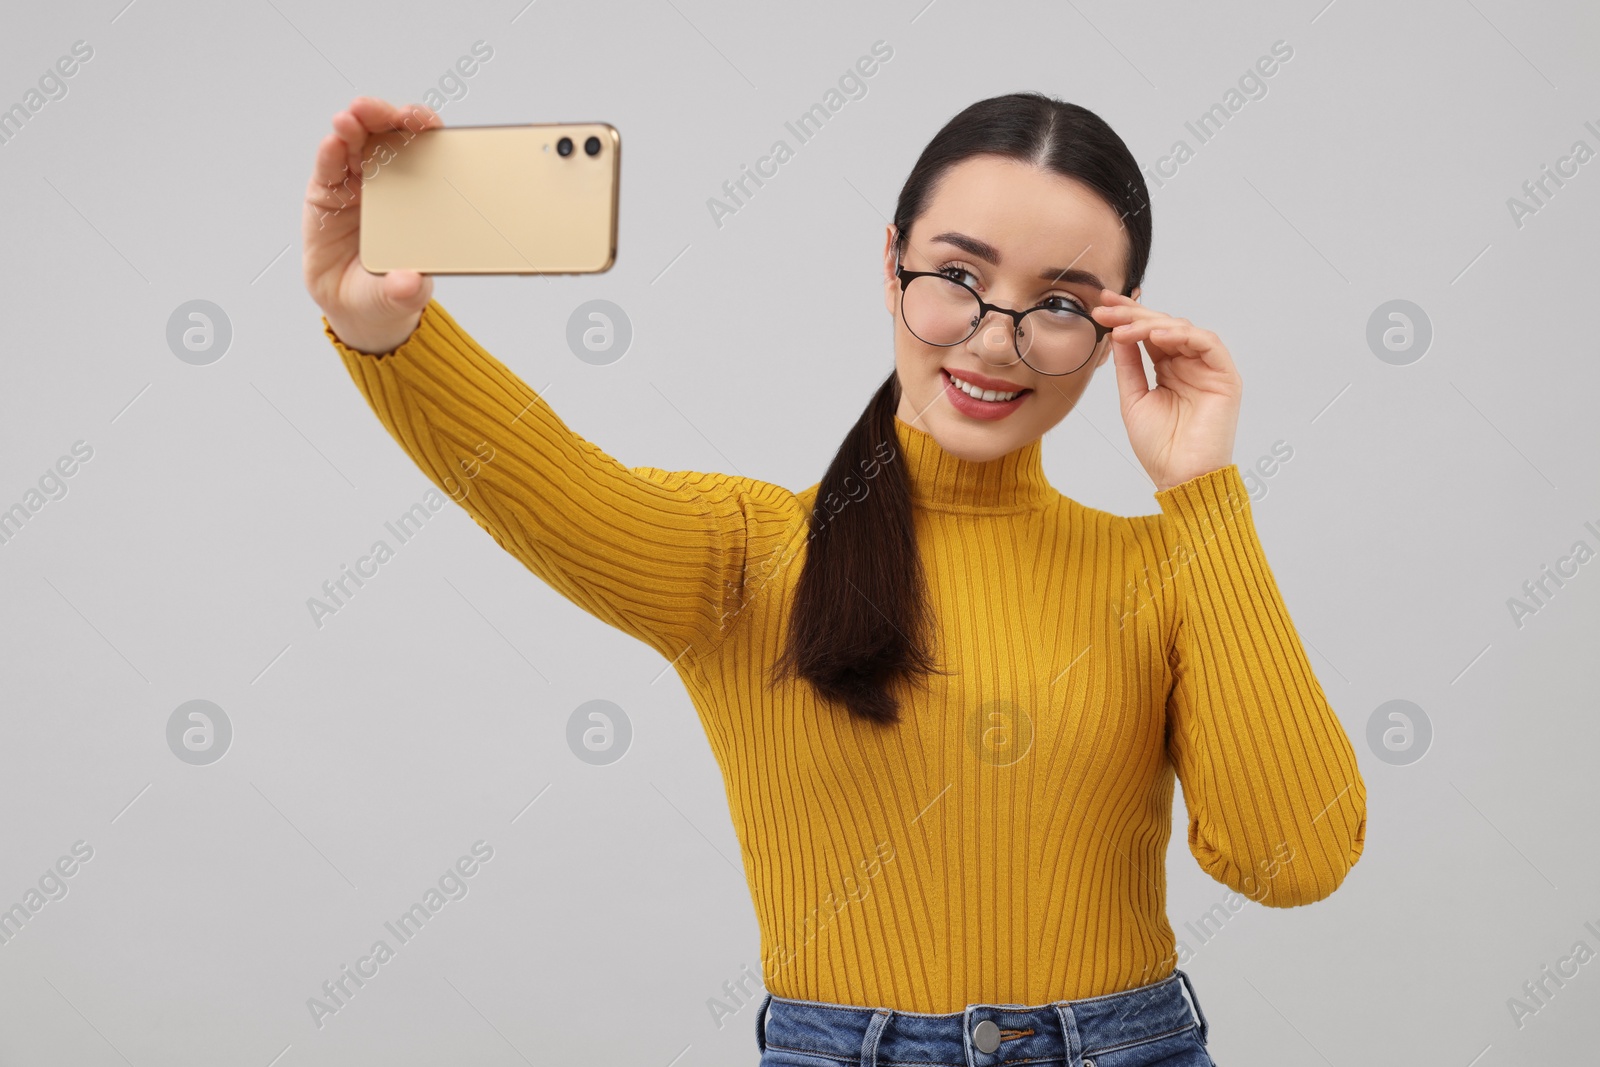 Photo of Smiling young woman taking selfie with smartphone on grey background